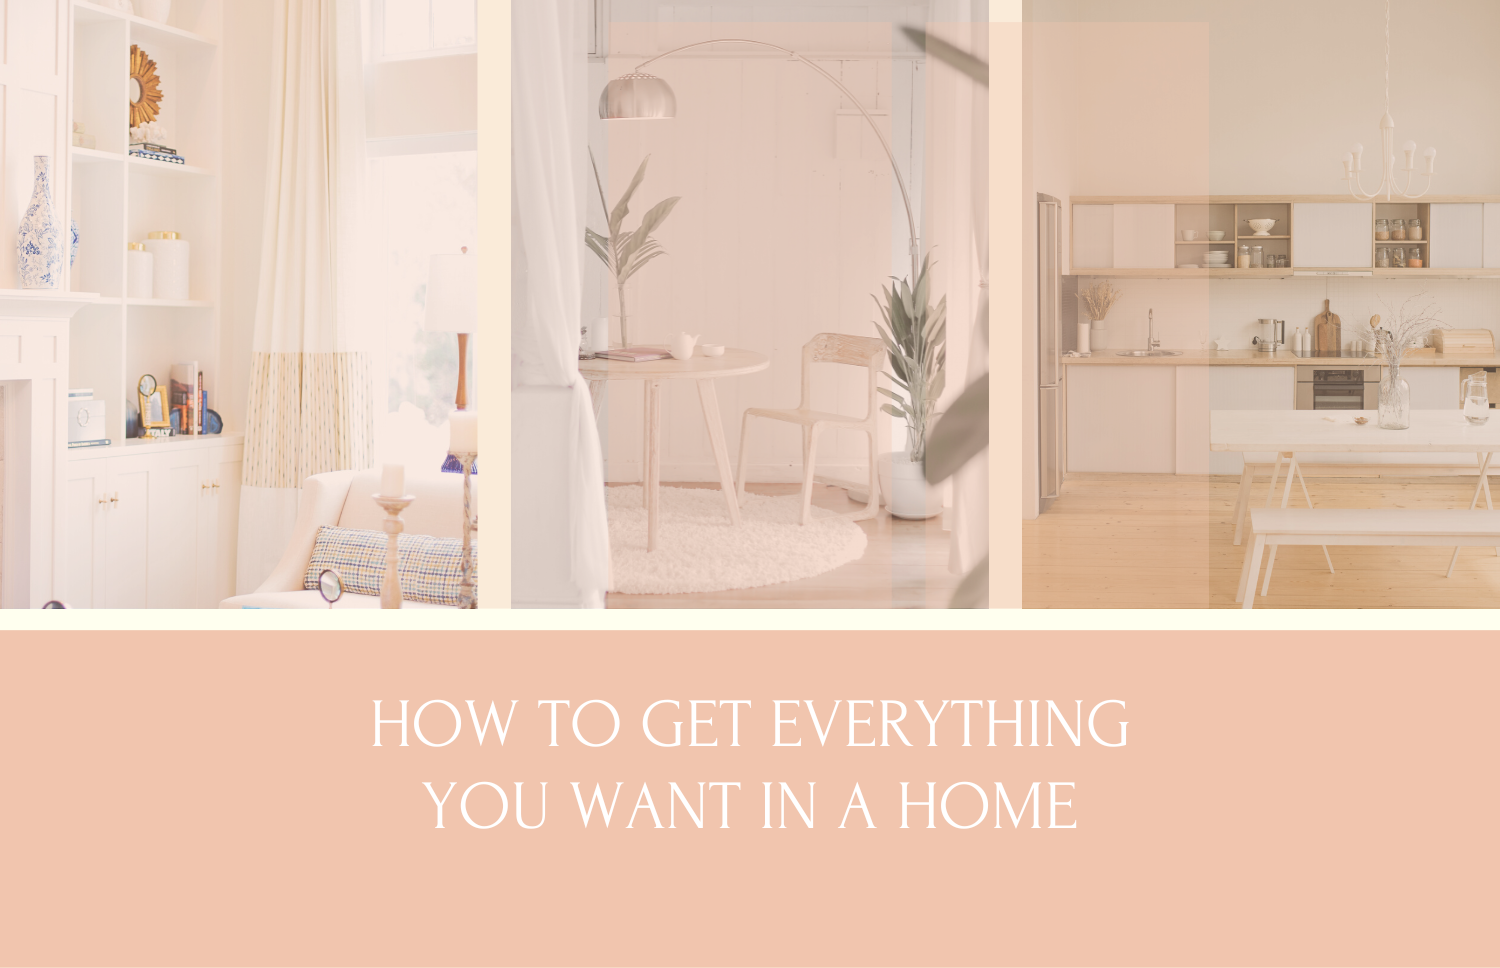 How To Get Everything You Want in a Home